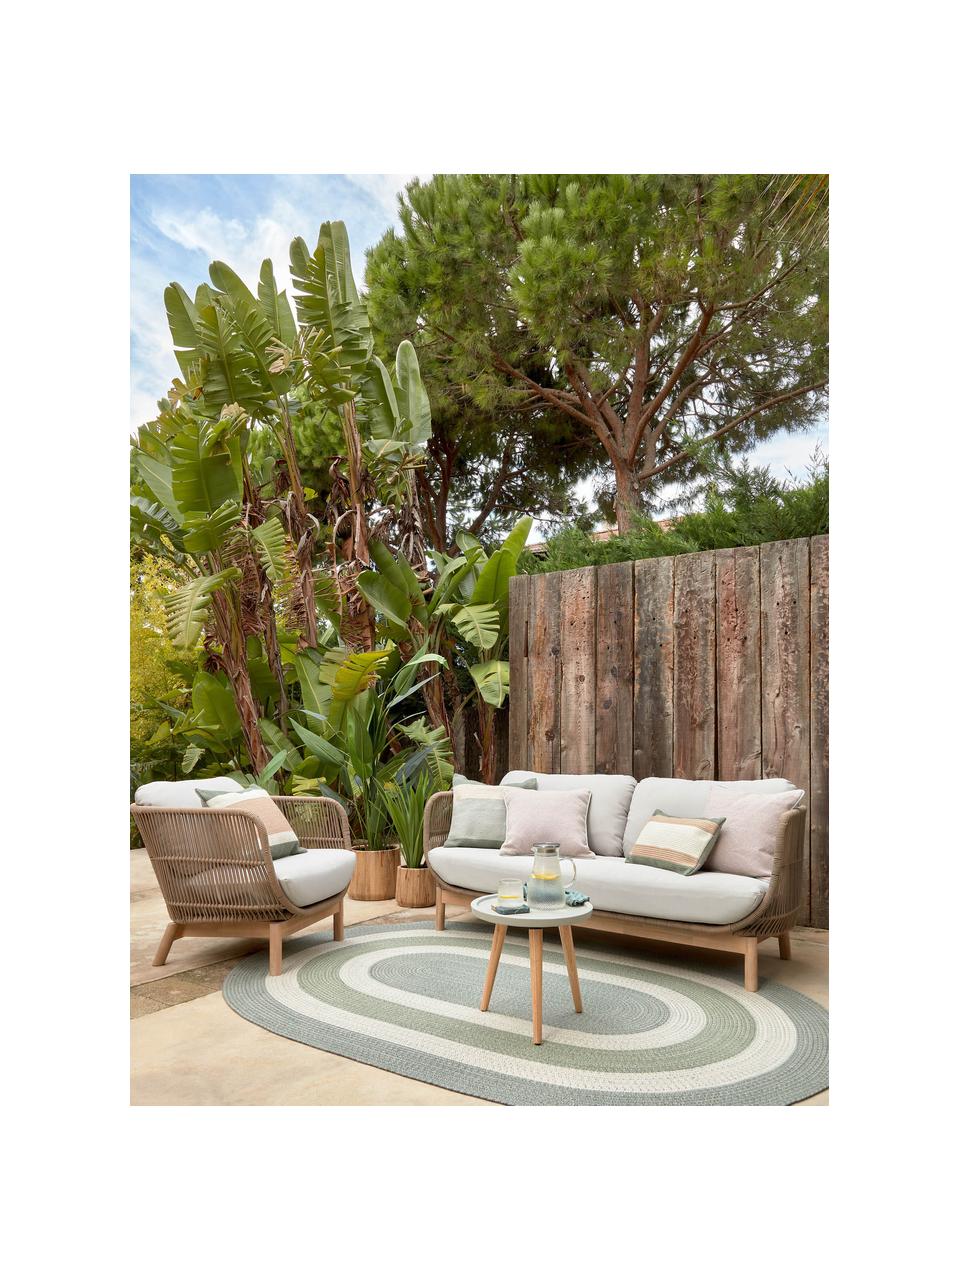 Tuin loungebank (2-zits) Catalina van acaciahout, Bekleding: 100% polyester, Frame: acaciahout Dit product is, Corduroy beige, acaciahout, B 170 x D 80 cm